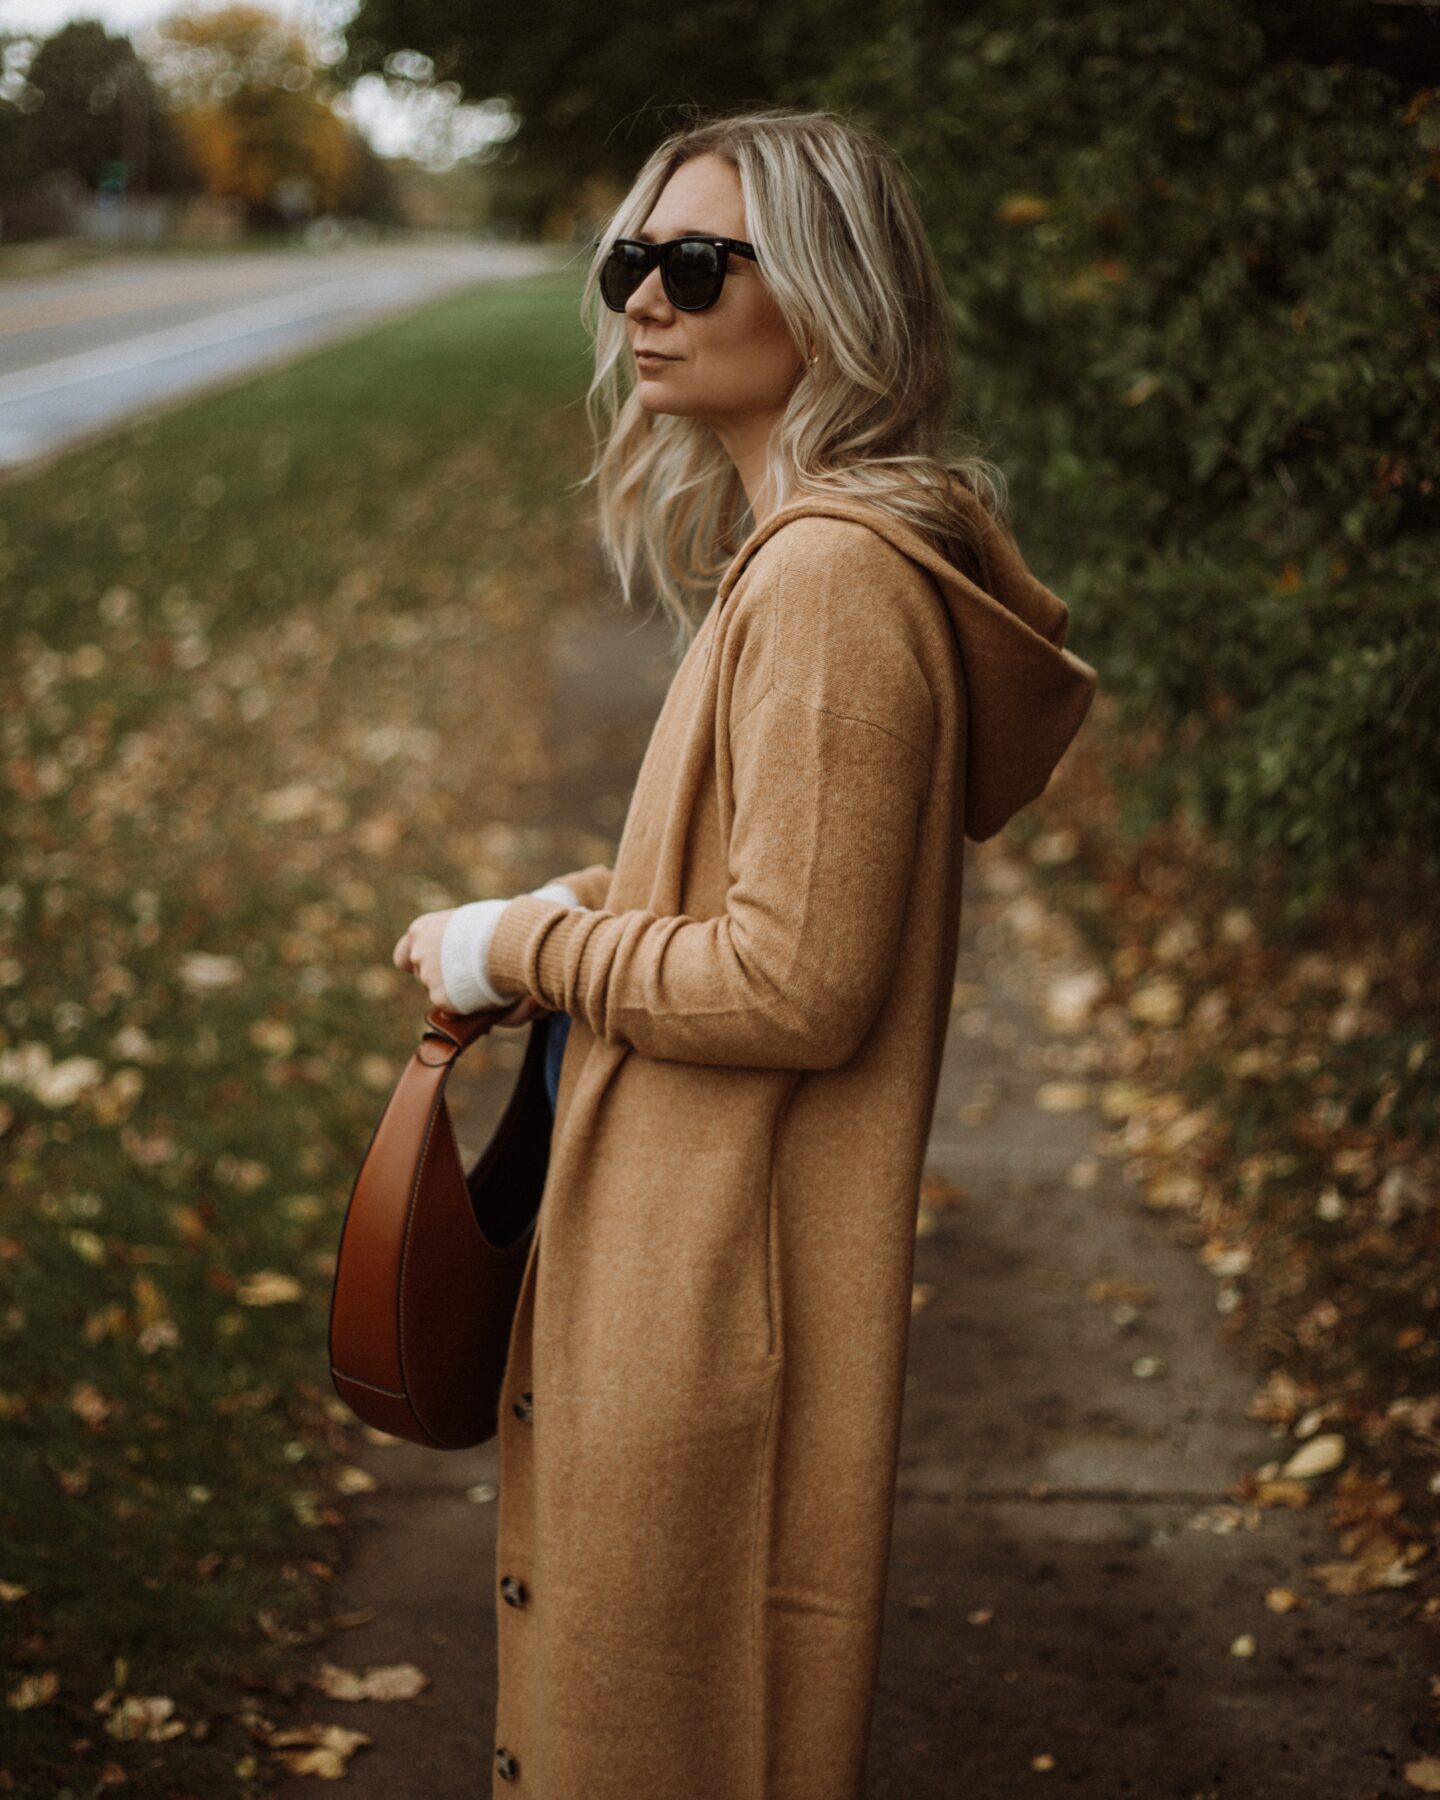 Karin Emily wears the cozy stretch duster from Everlane, a henley tee, and a staud moon bag